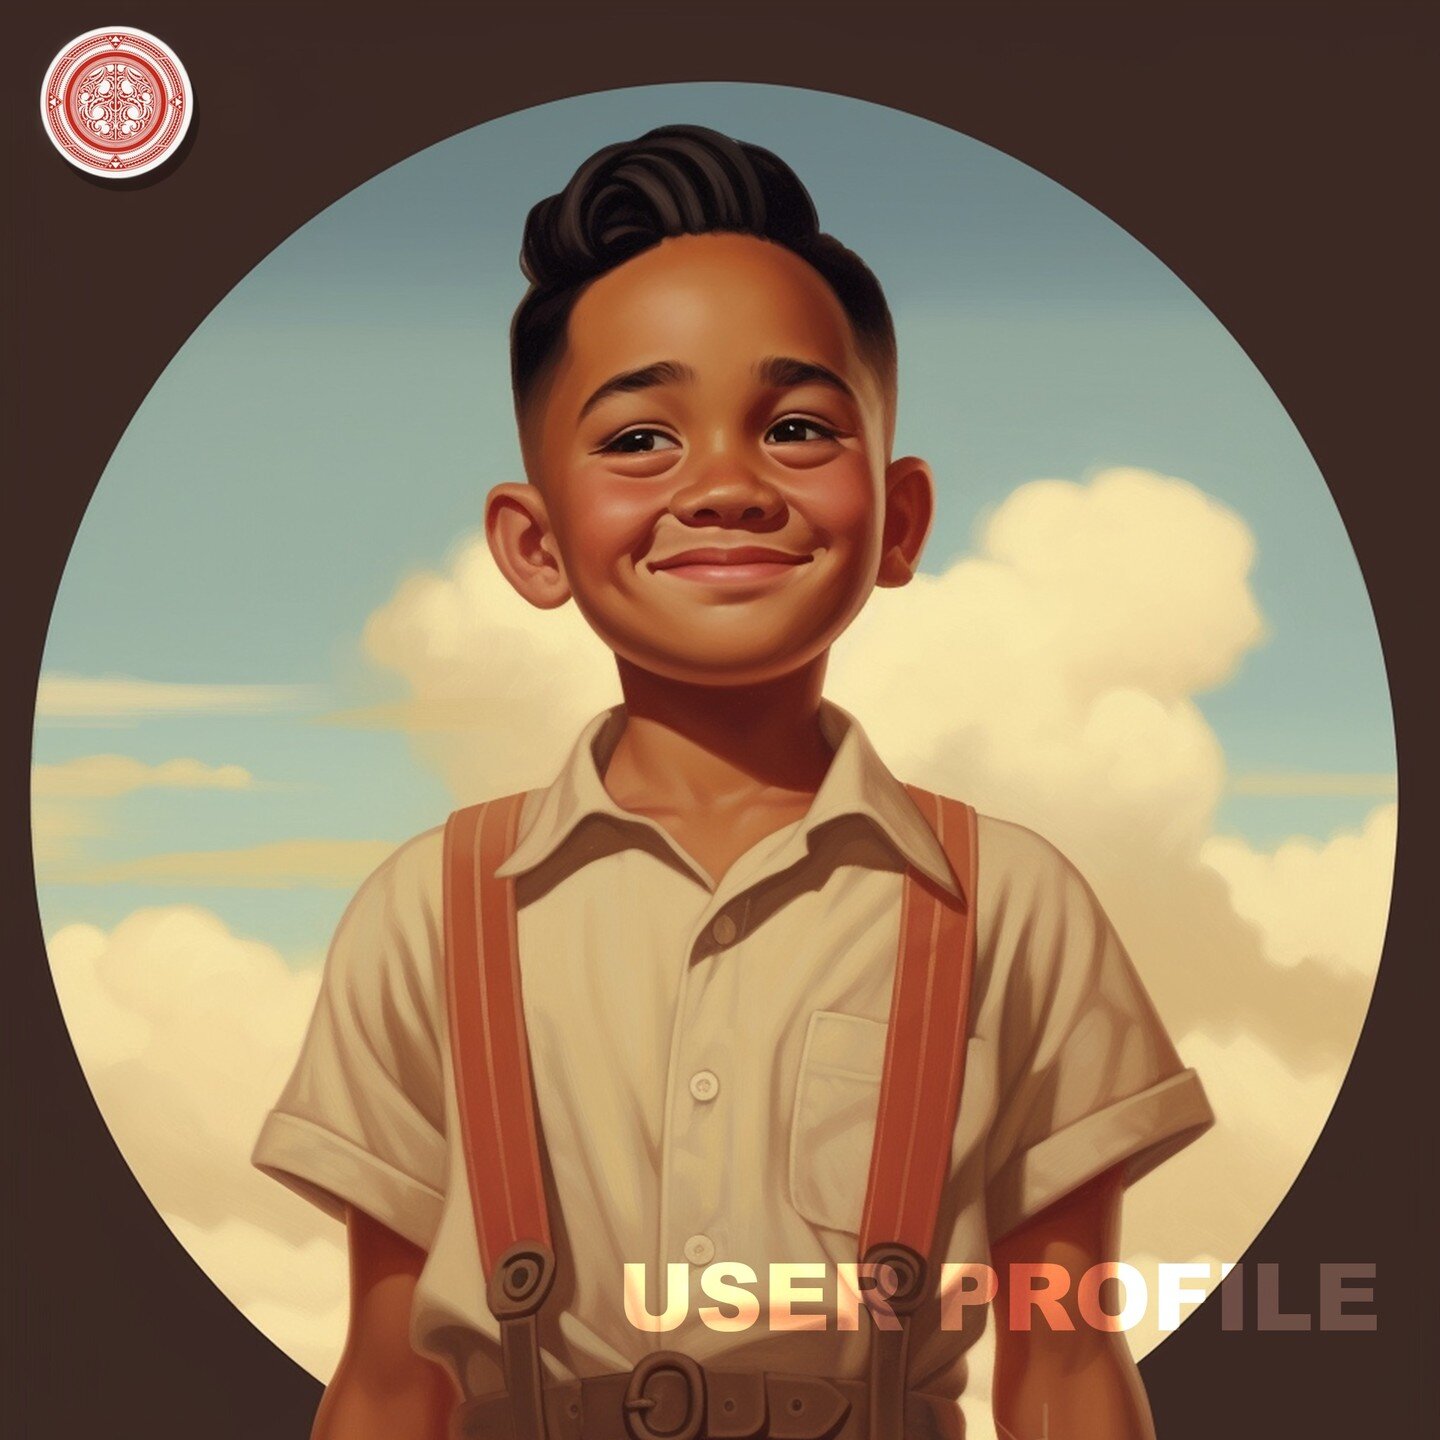 User Profile: Curious Māori Boy Exploring the Virtual Marae

Name: Tane M

Backstory: Tane is a bright and curious 6-year-old Māori boy living in a remote part of the South Island. While he's aware that the closest marae is several hours away, his im